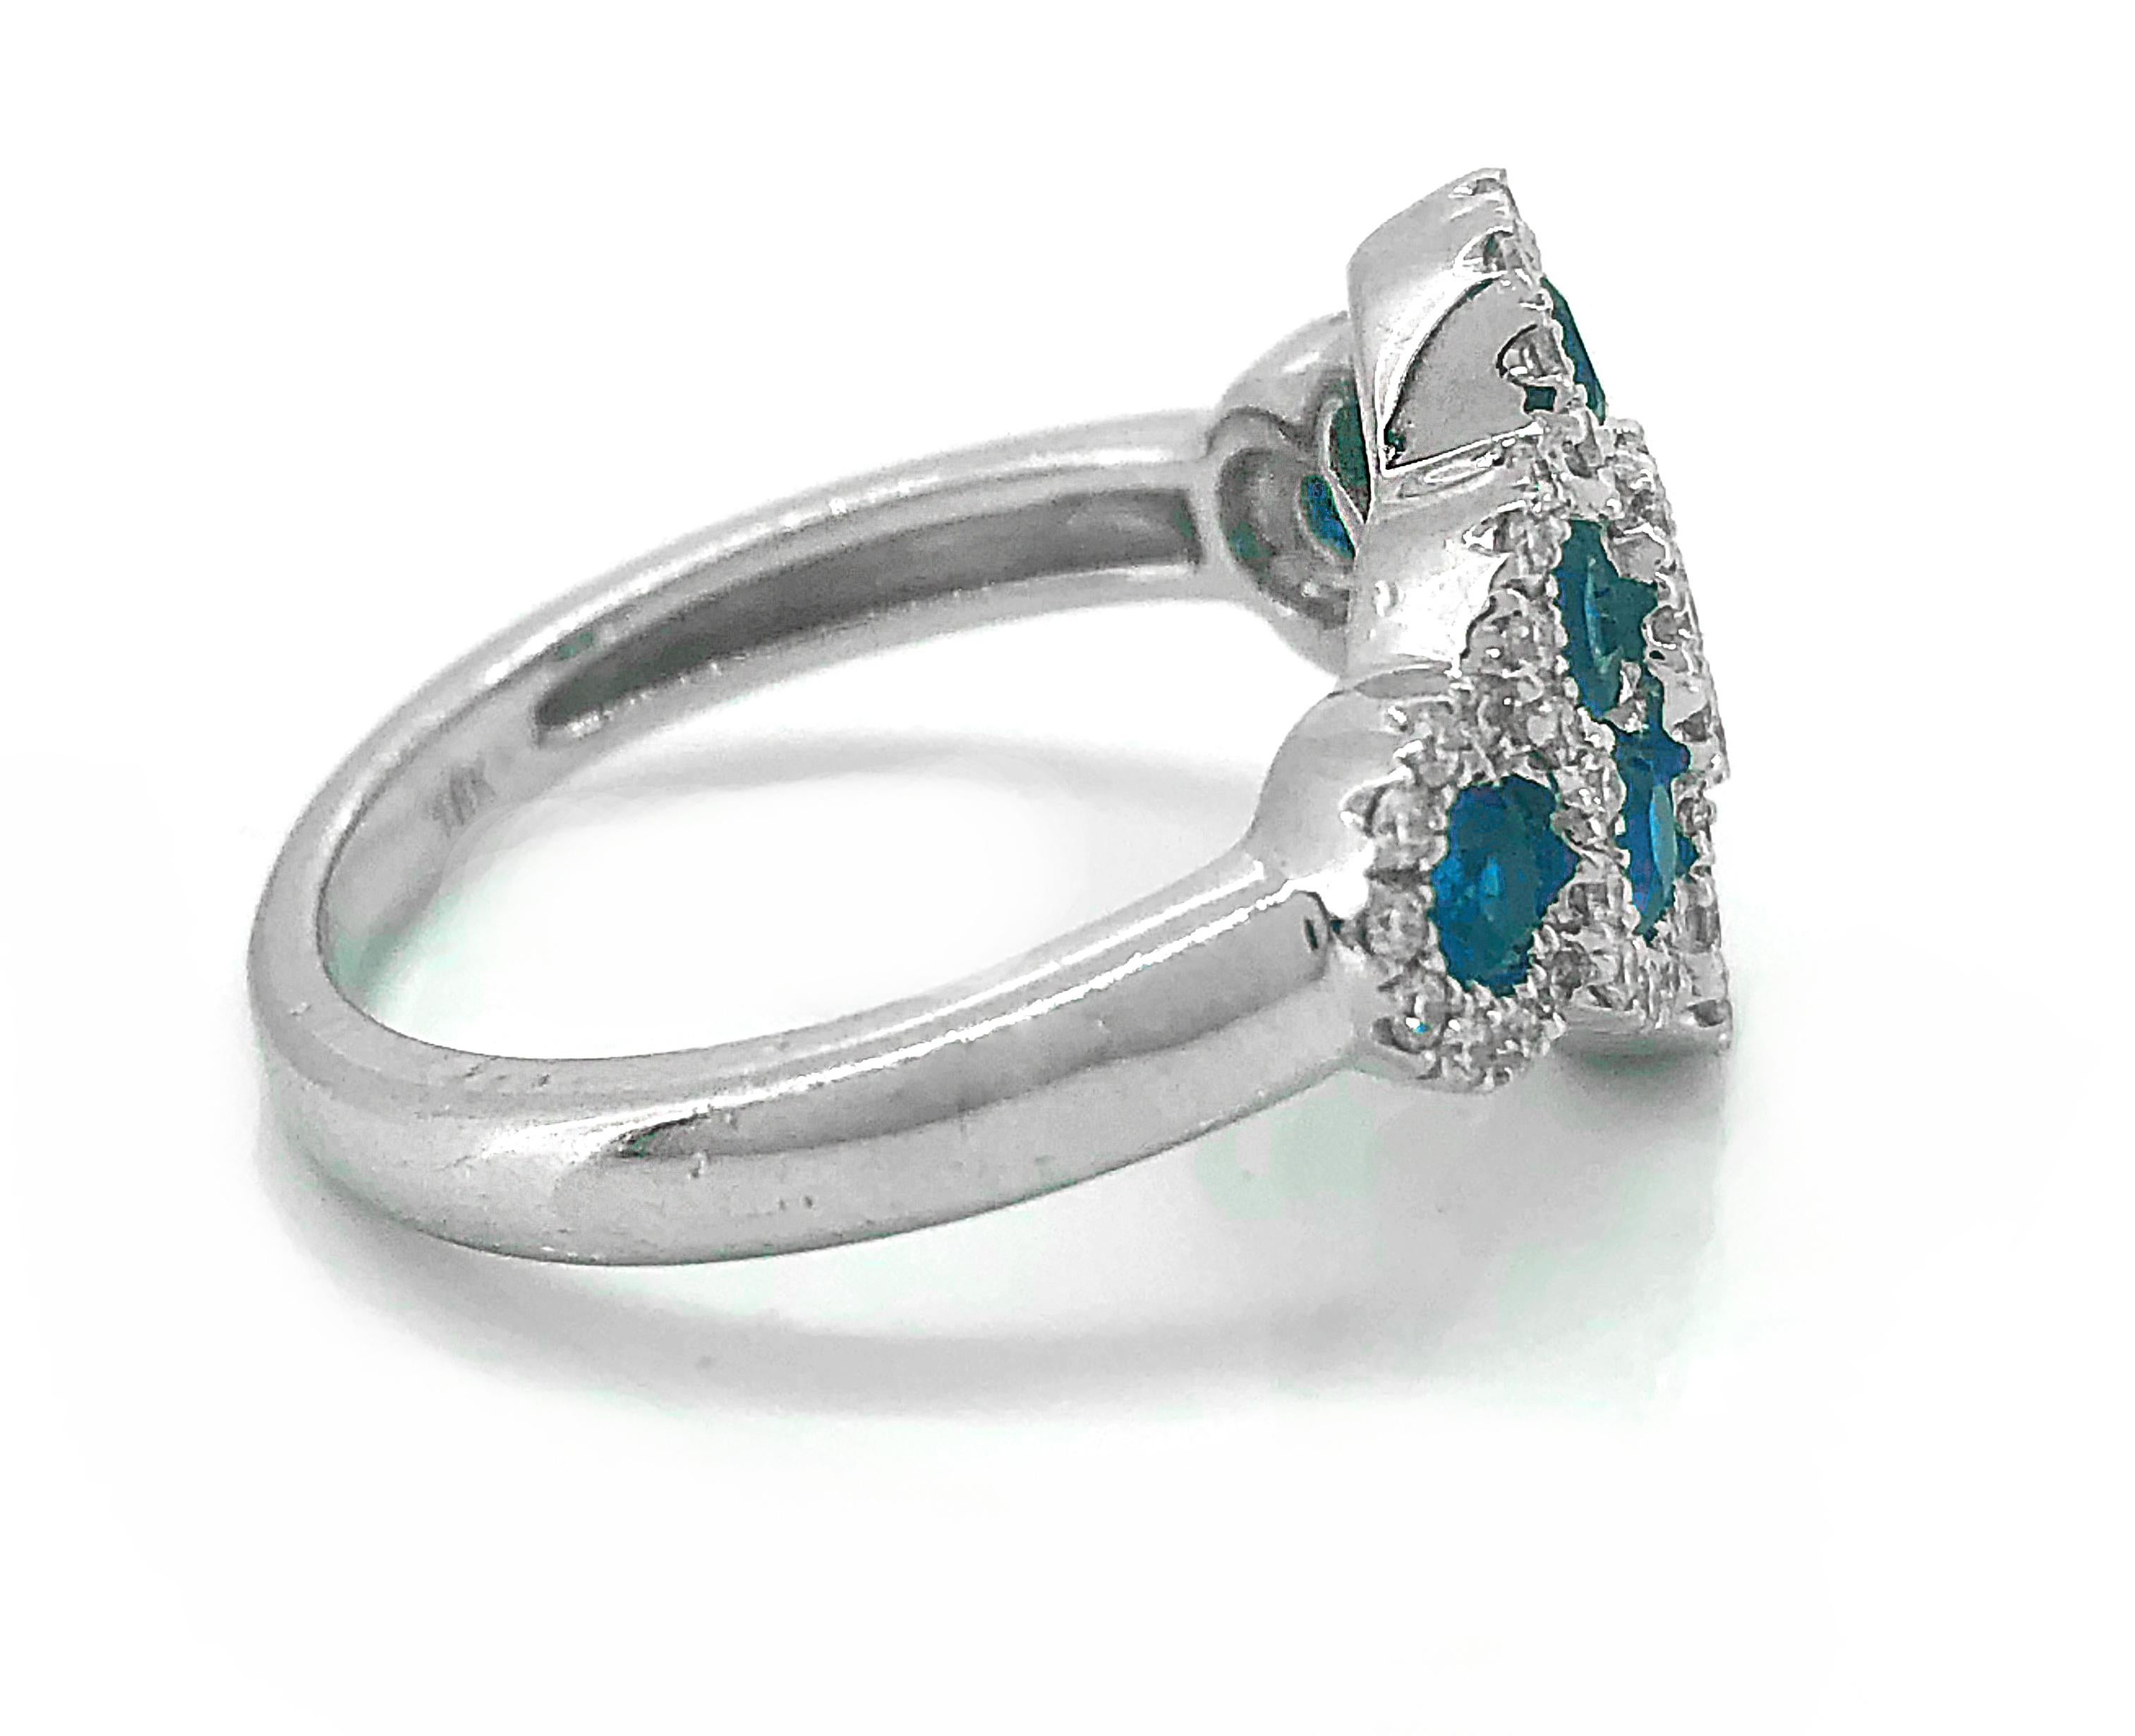 A lovely 18K white gold sapphire and diamond Estate engagement or fashion ring crafted by 